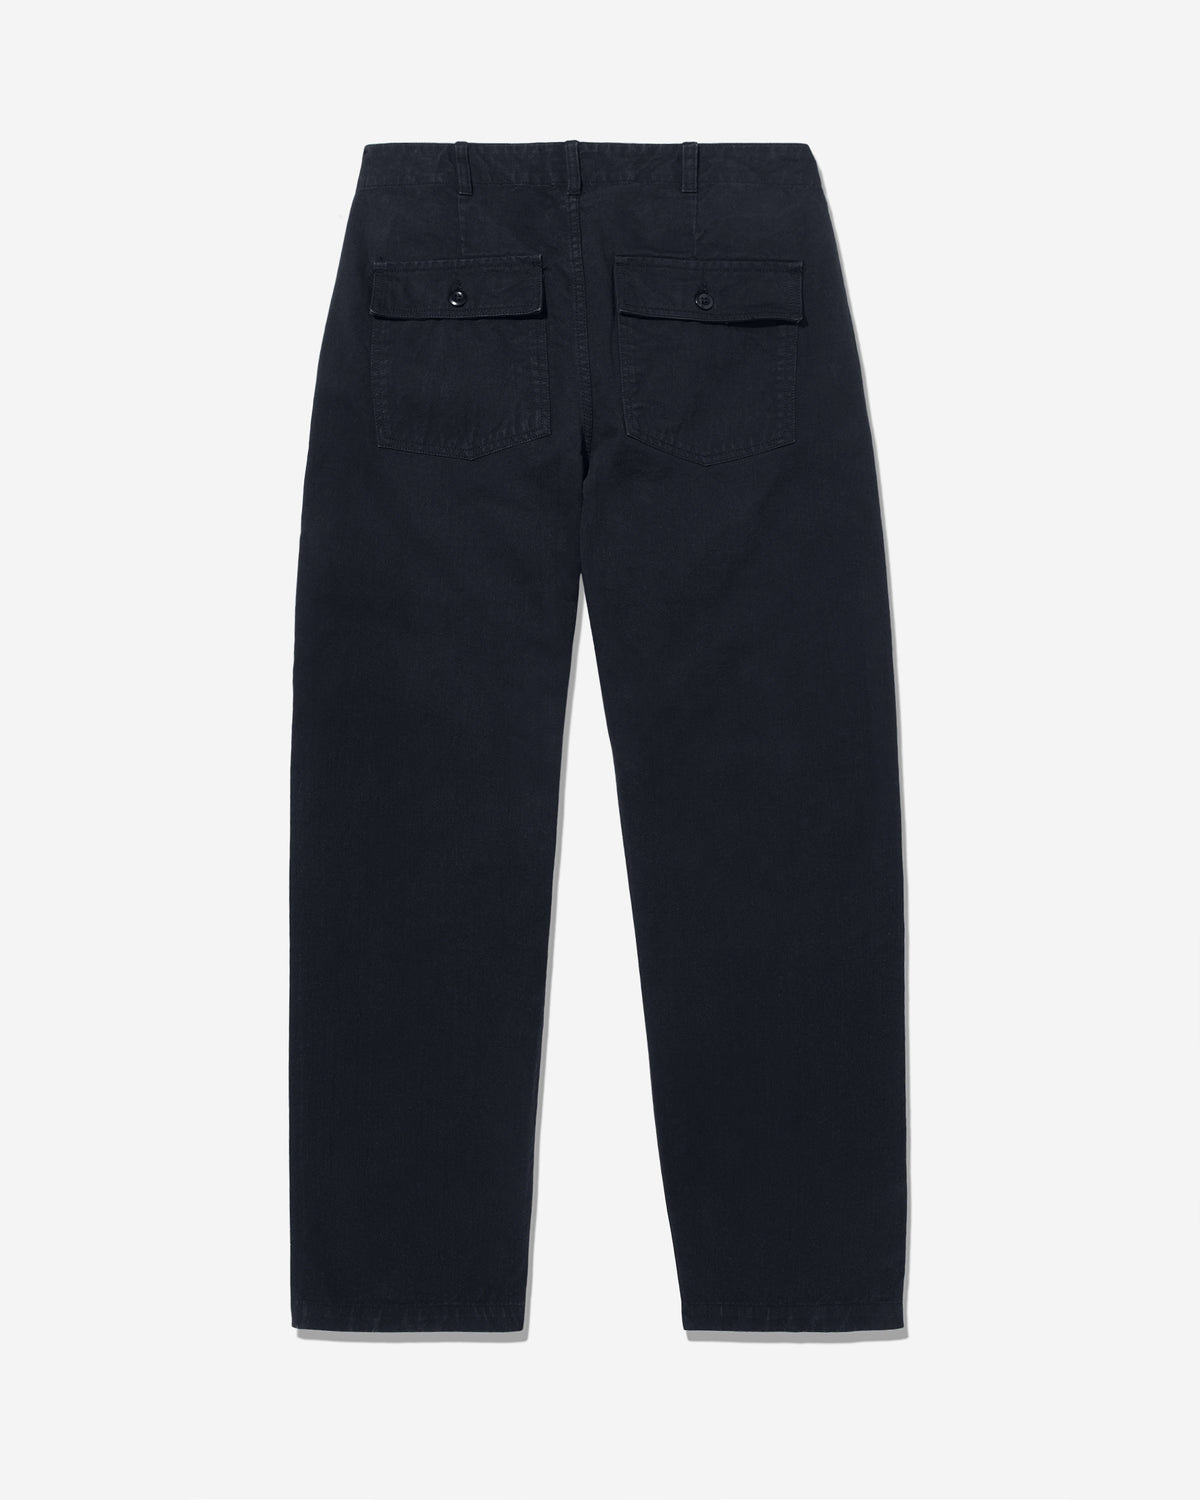 Pleated Fatigue Pant